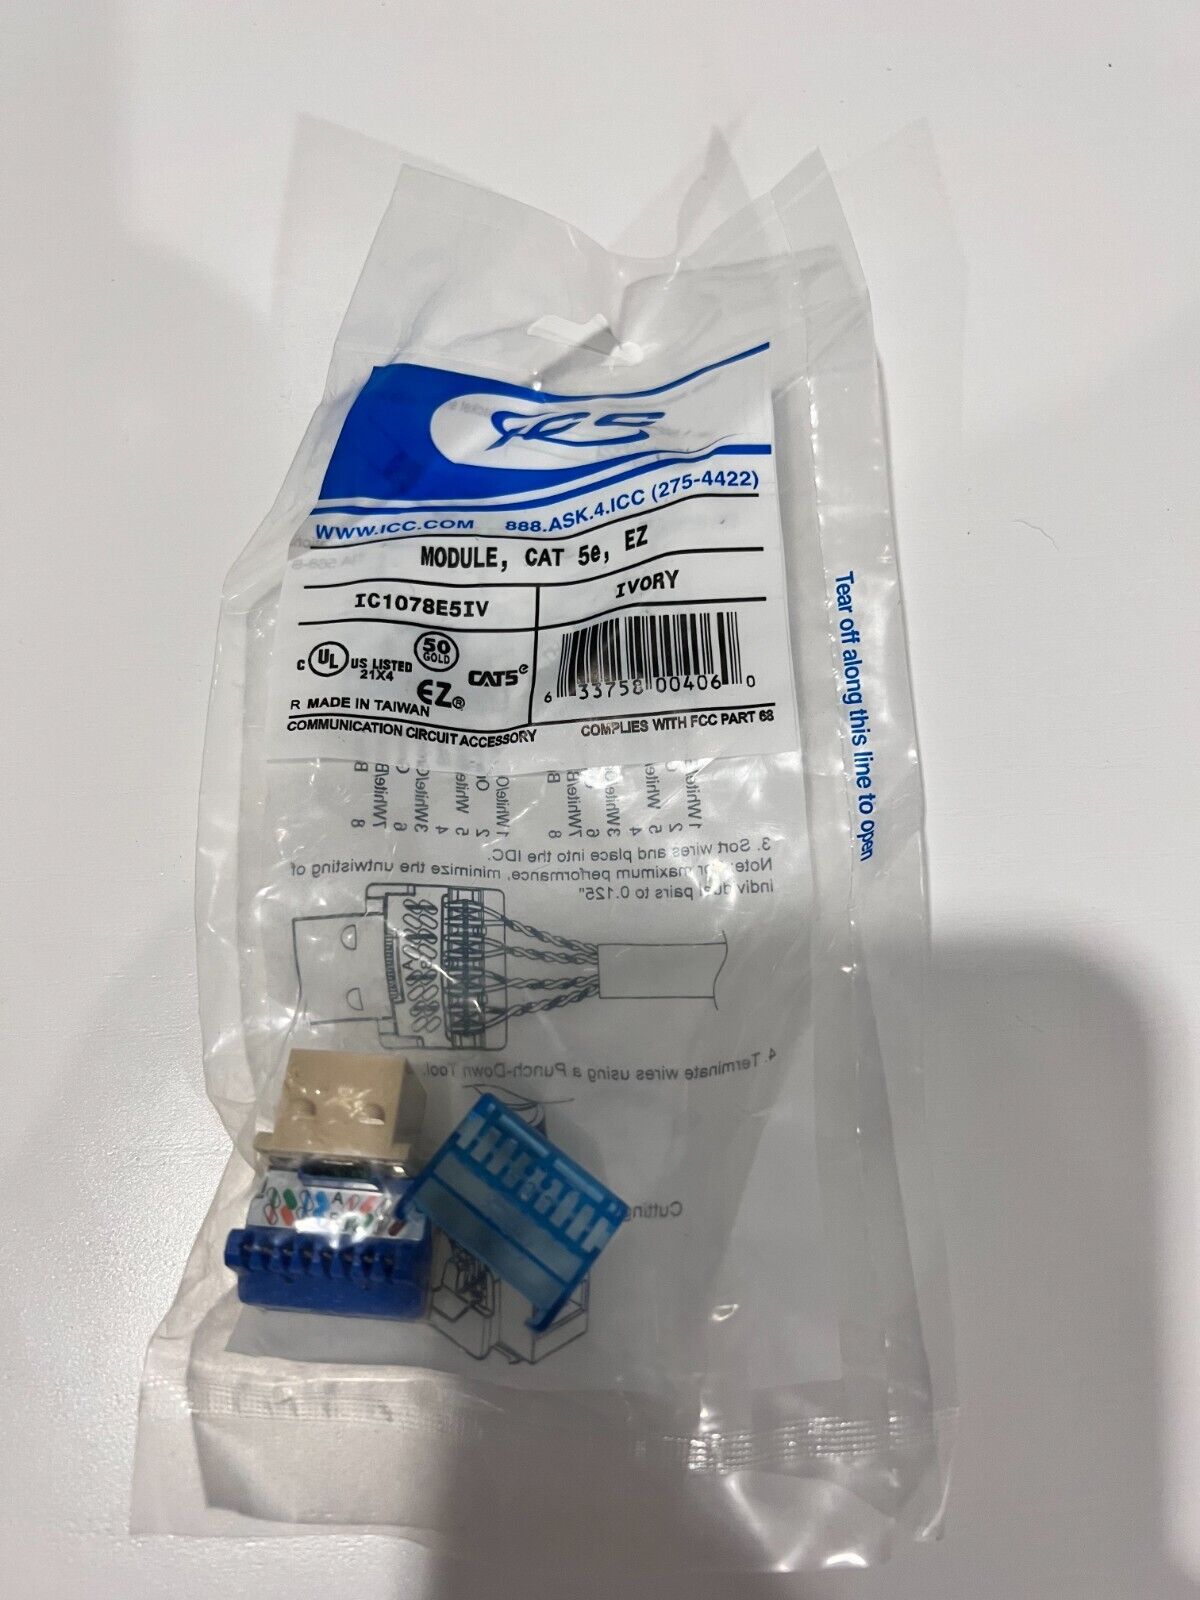 New In Sealed Packaging ICC IC1078E5IV Modules CAT 5e EZ Ivory